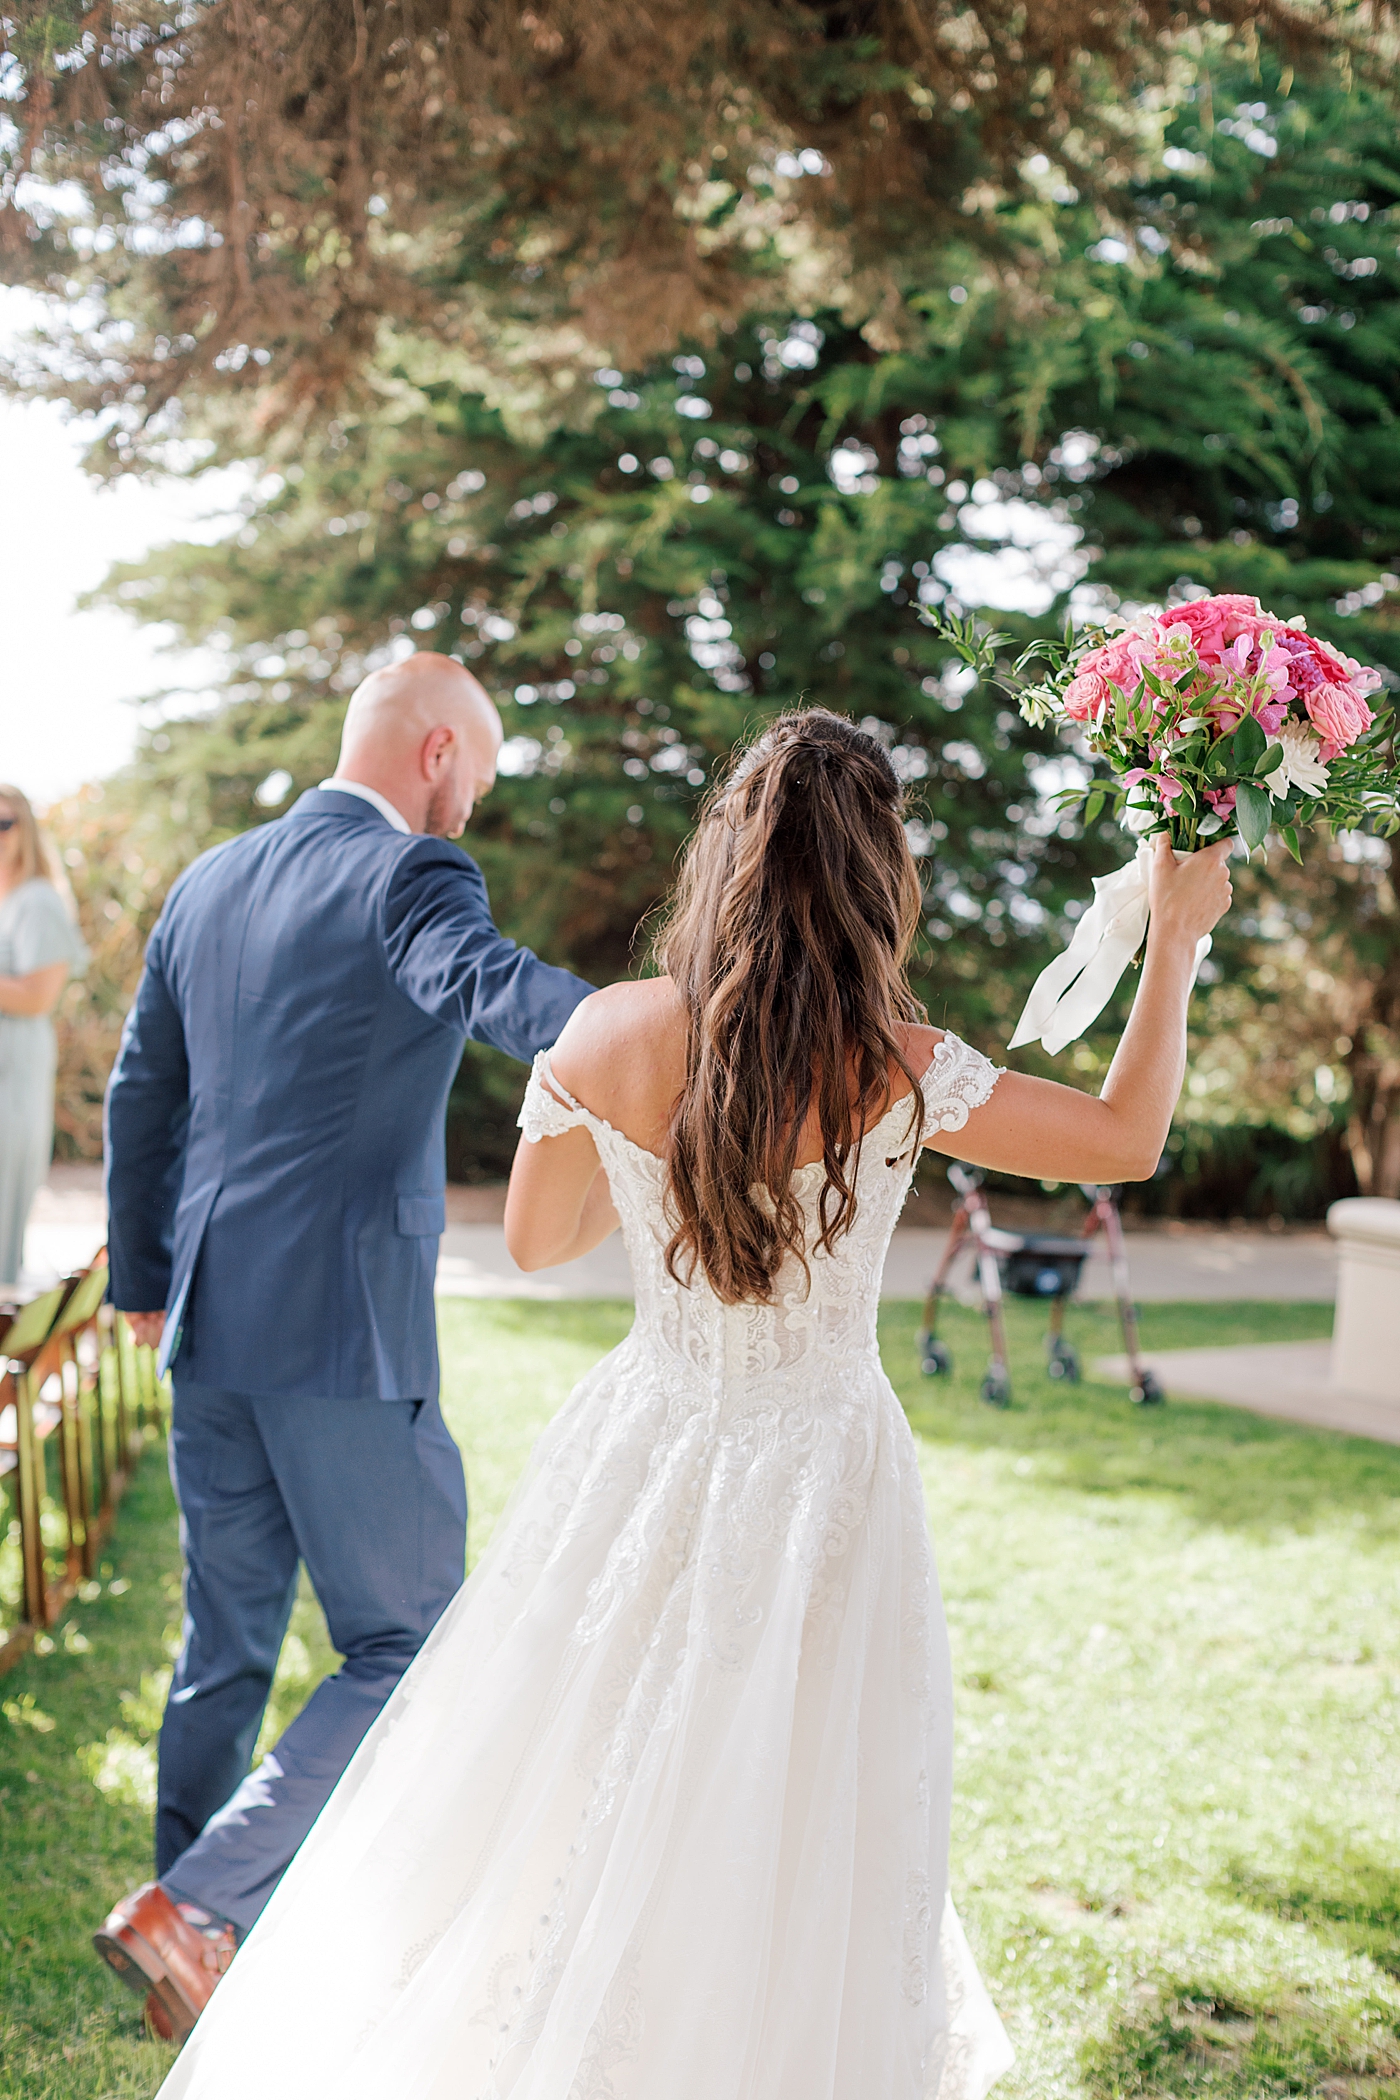 Bride and groom holding hands while walking away from the camera while bride holds bouquet in the air | Image by Hope Helmuth Photography